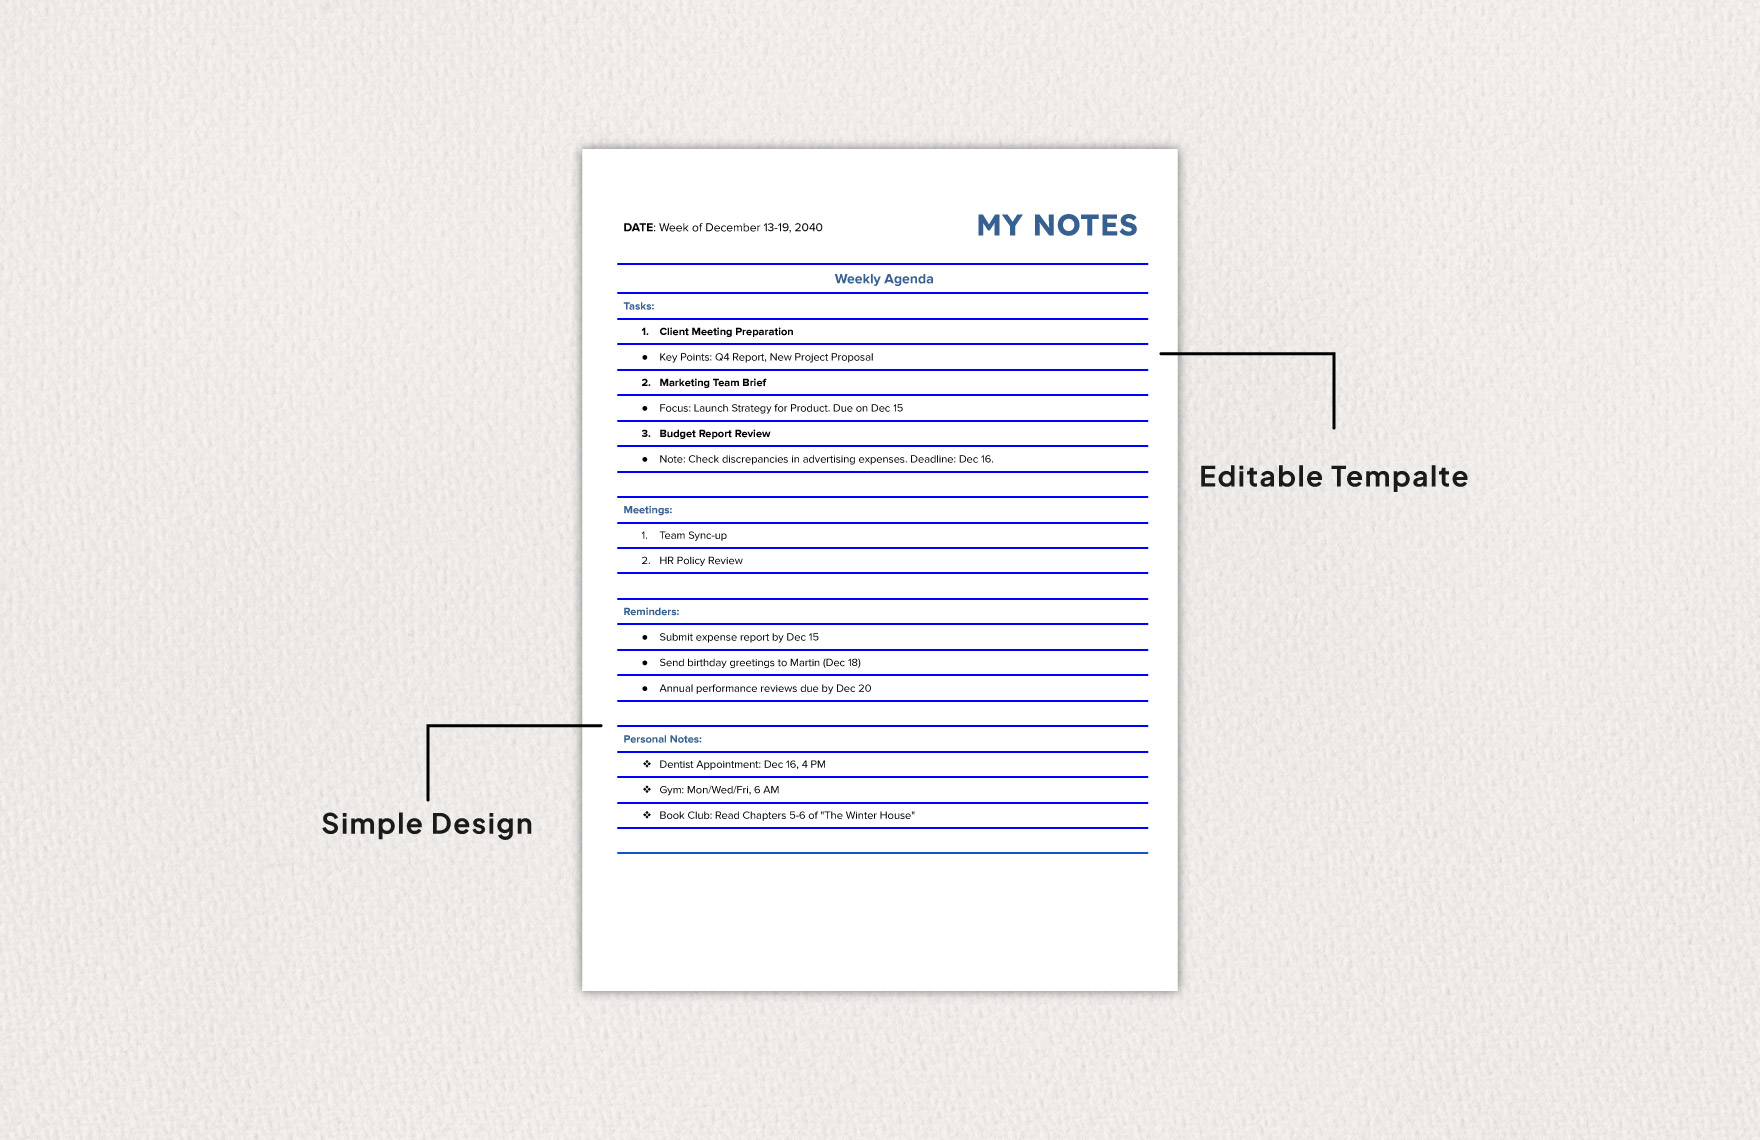 Virtual Note Paper Template